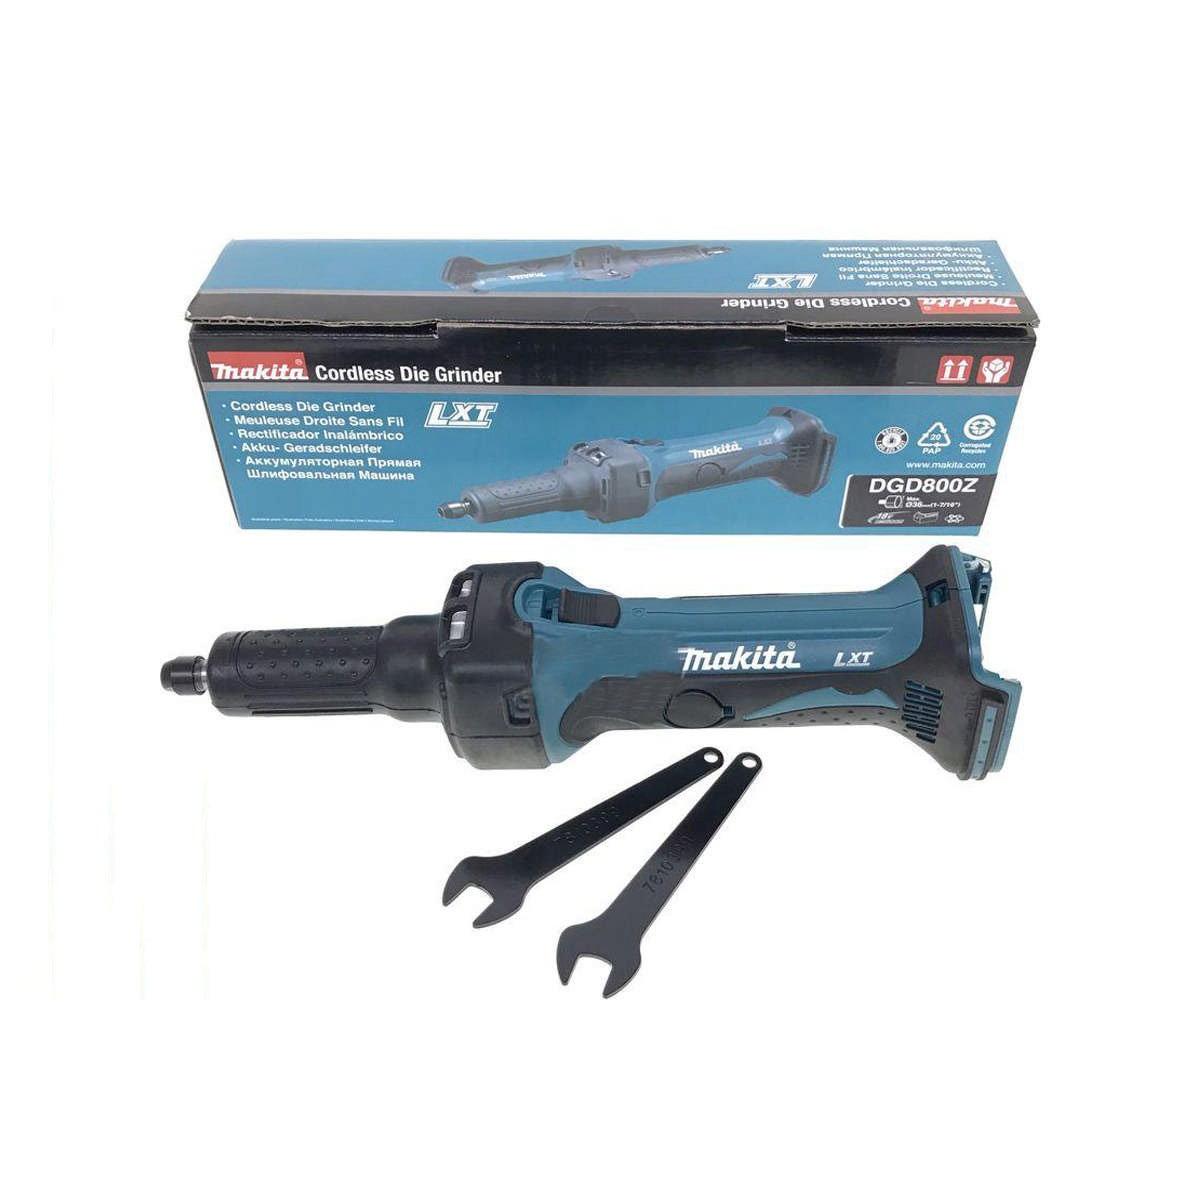 Makita 18v Cordless Die Grinder DGD800Z Power Tool Services